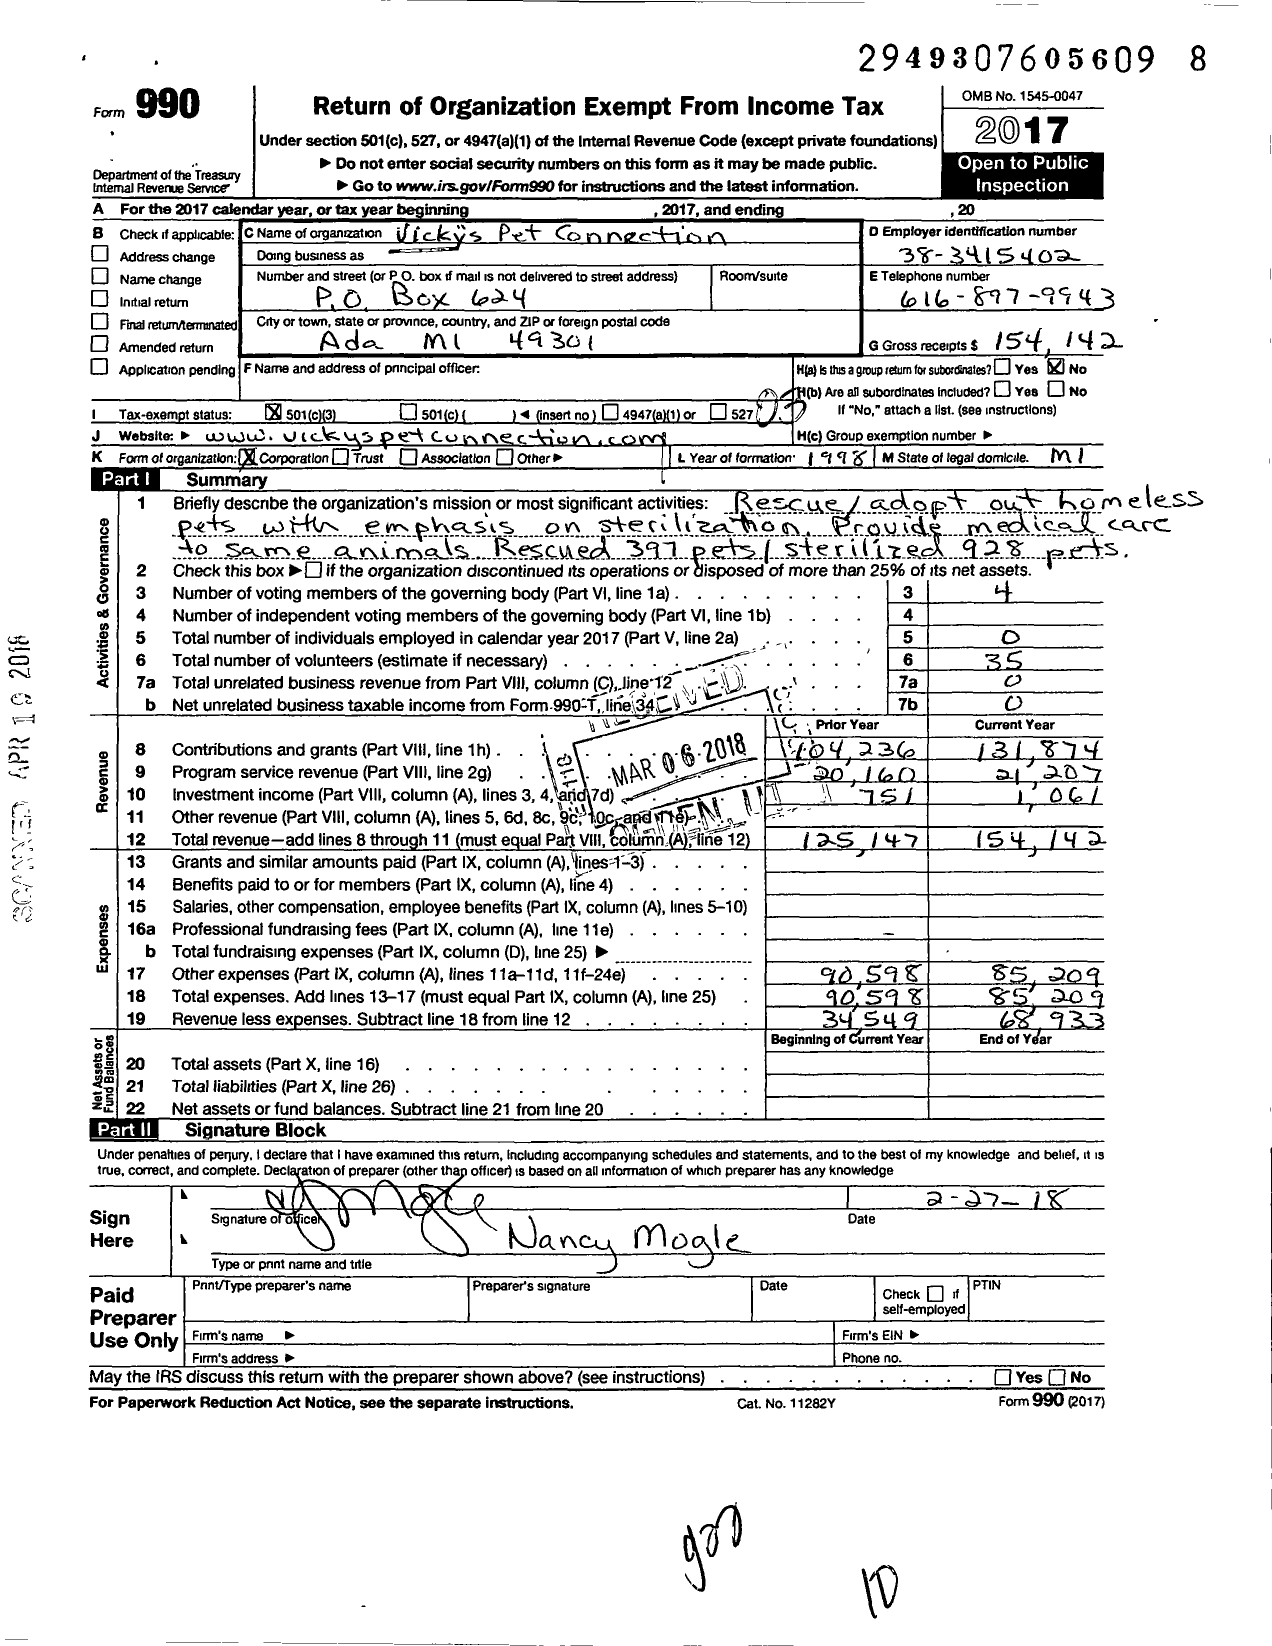 Image of first page of 2017 Form 990 for Vickys Pet Connection